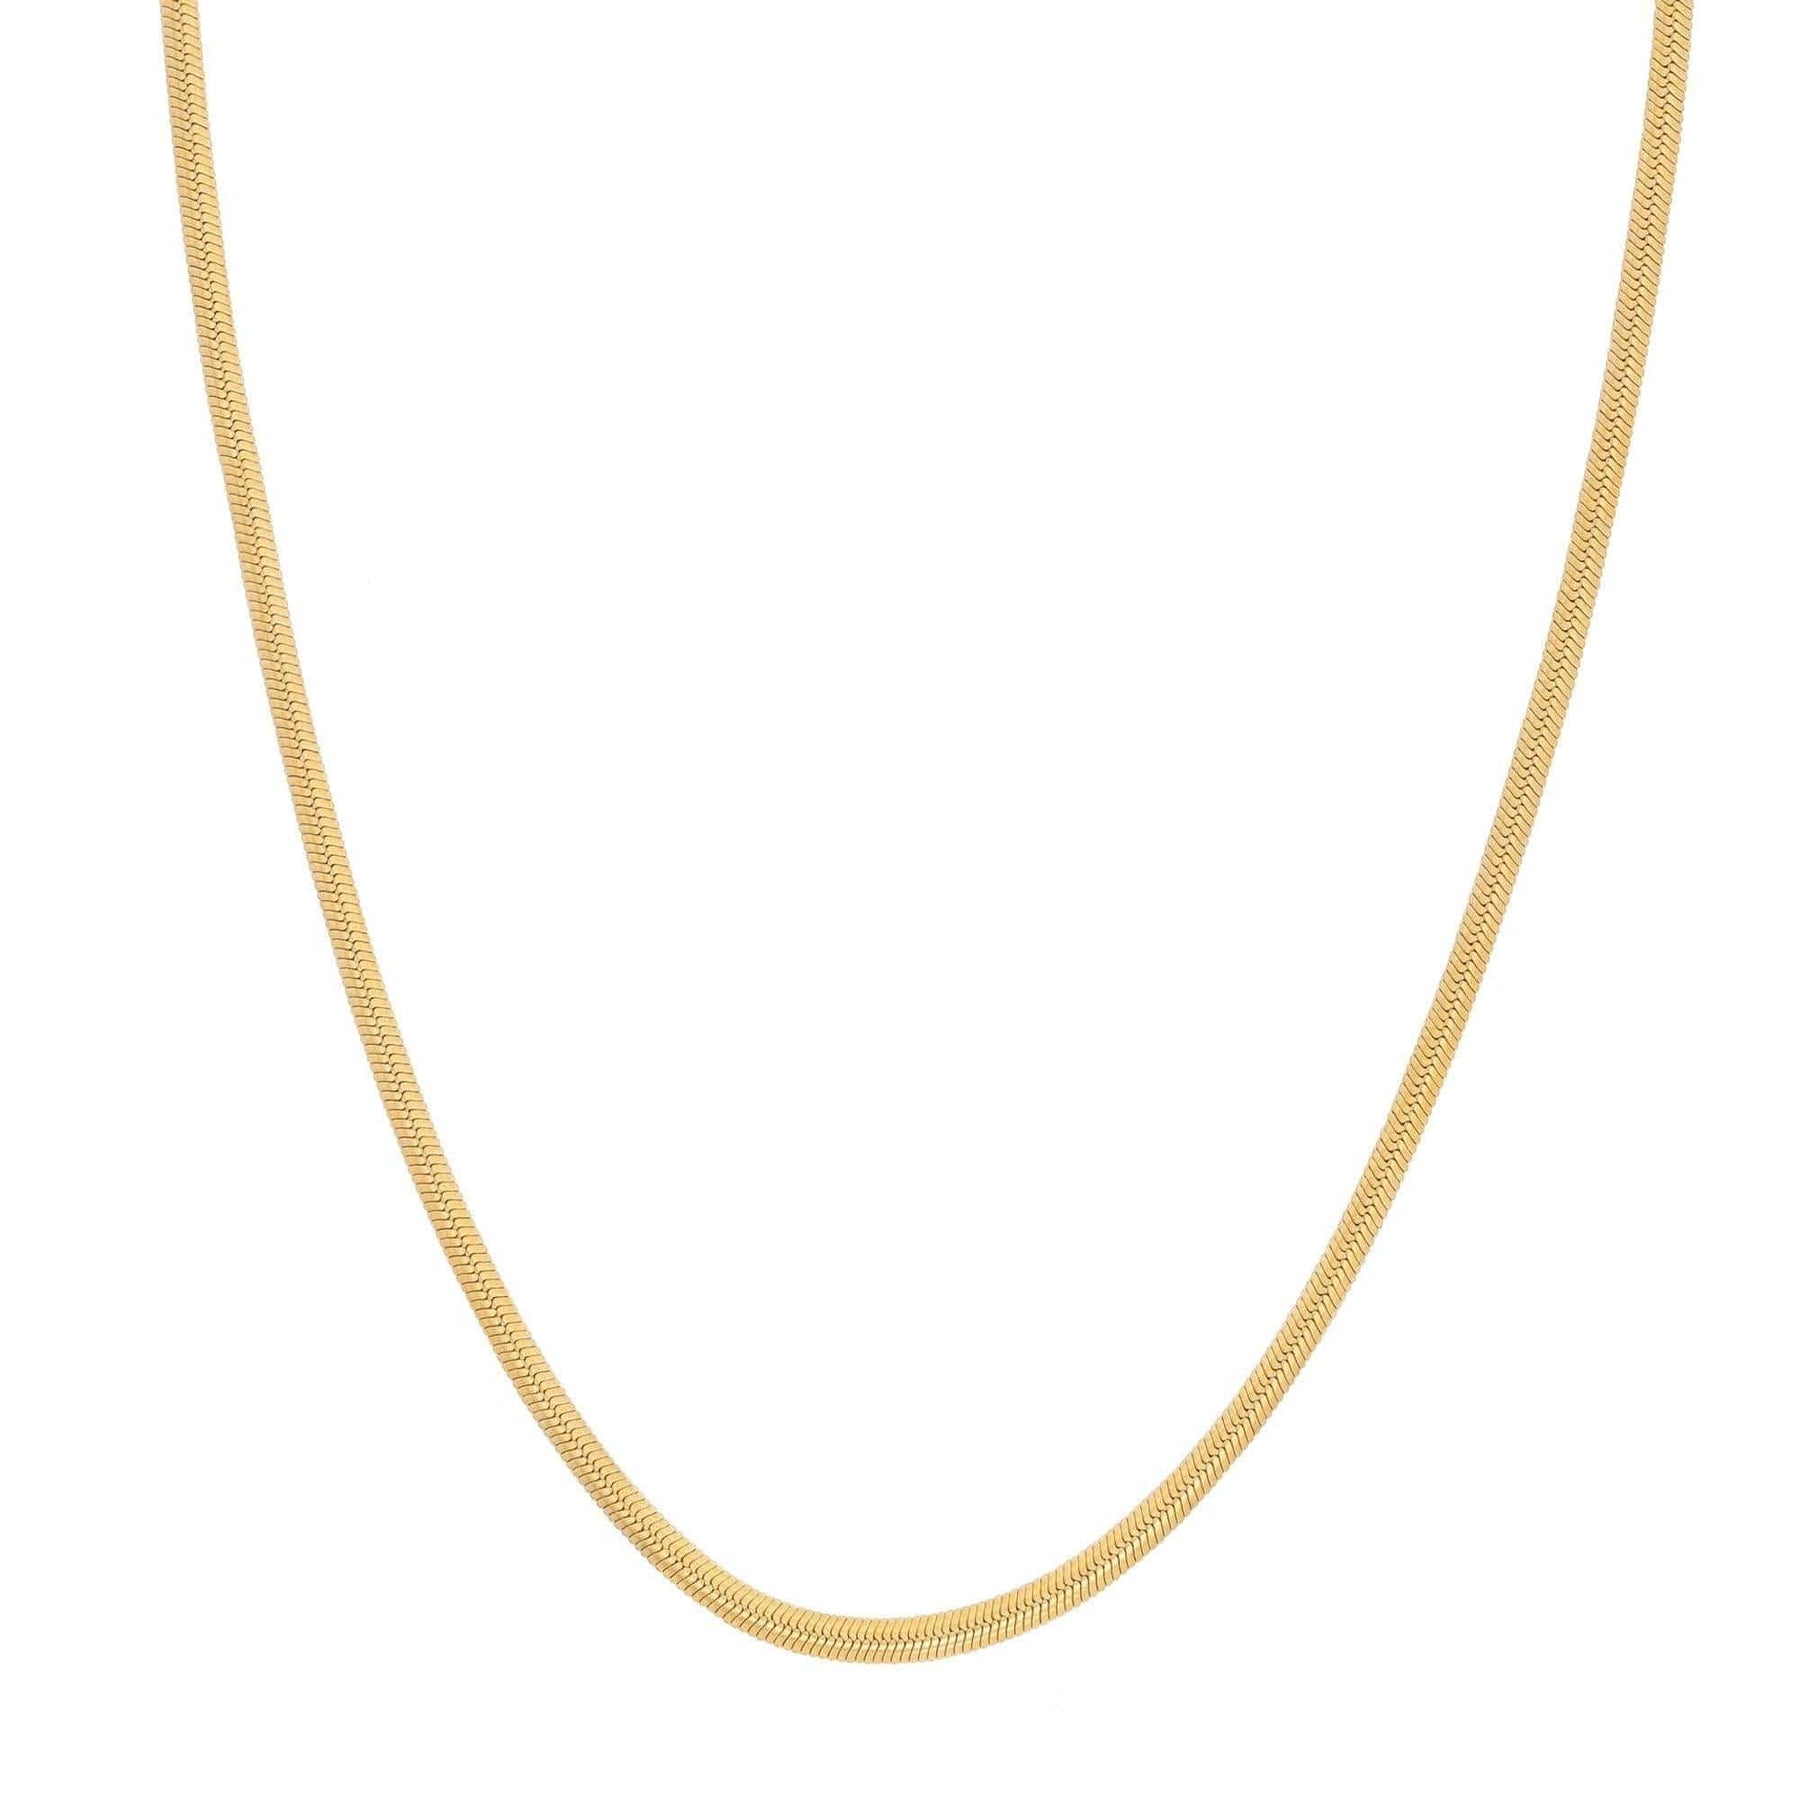 BohoMoon Stainless Steel Emilia Choker / Necklace Gold / Necklace